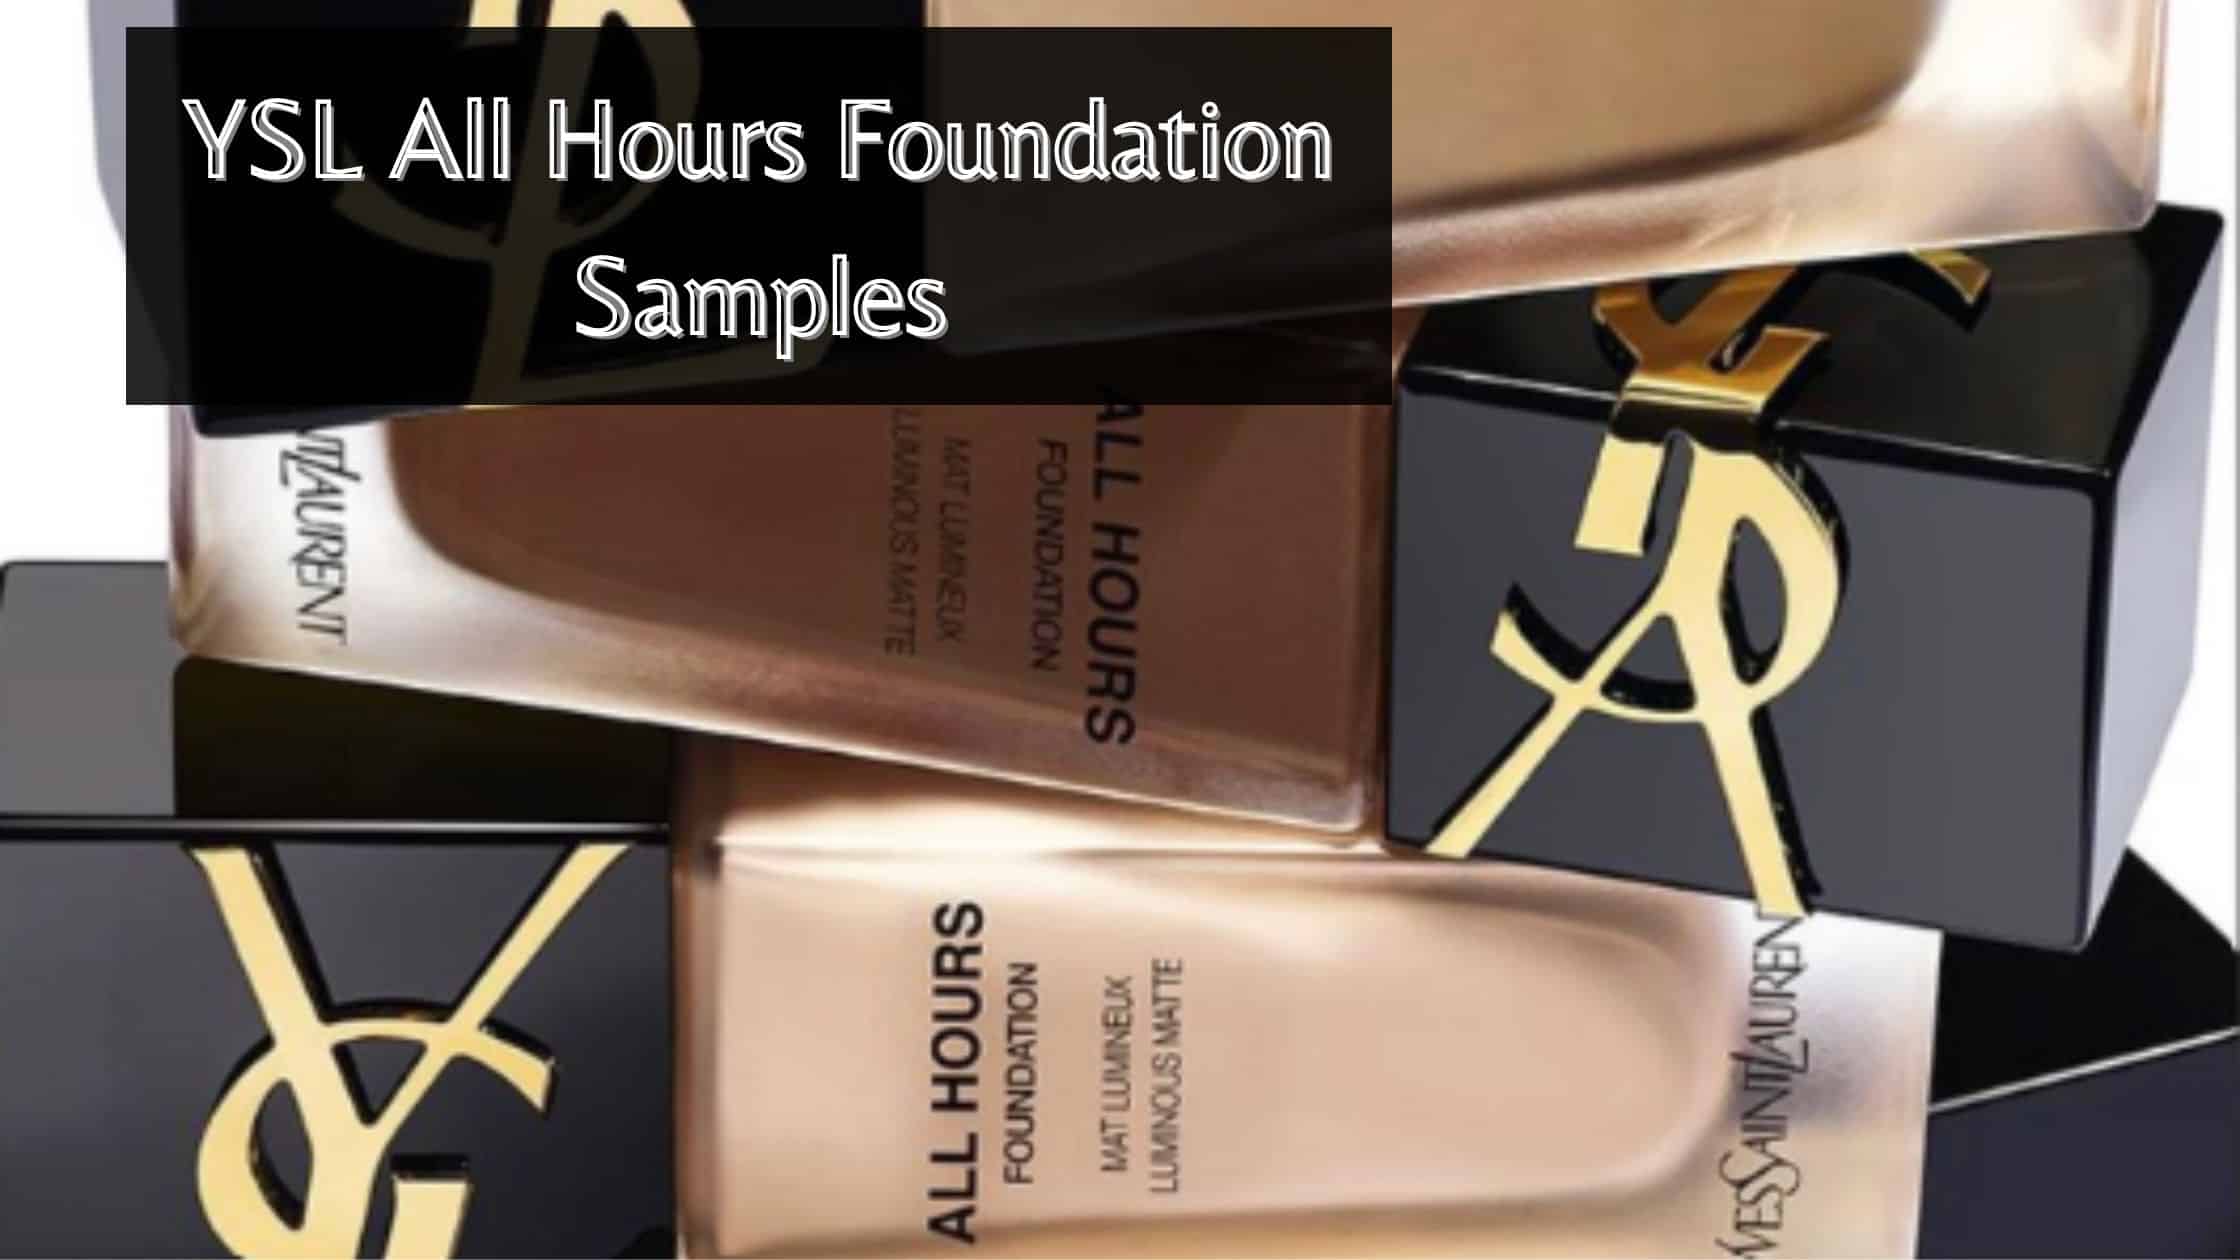 YSL All Hours Foundation Samples